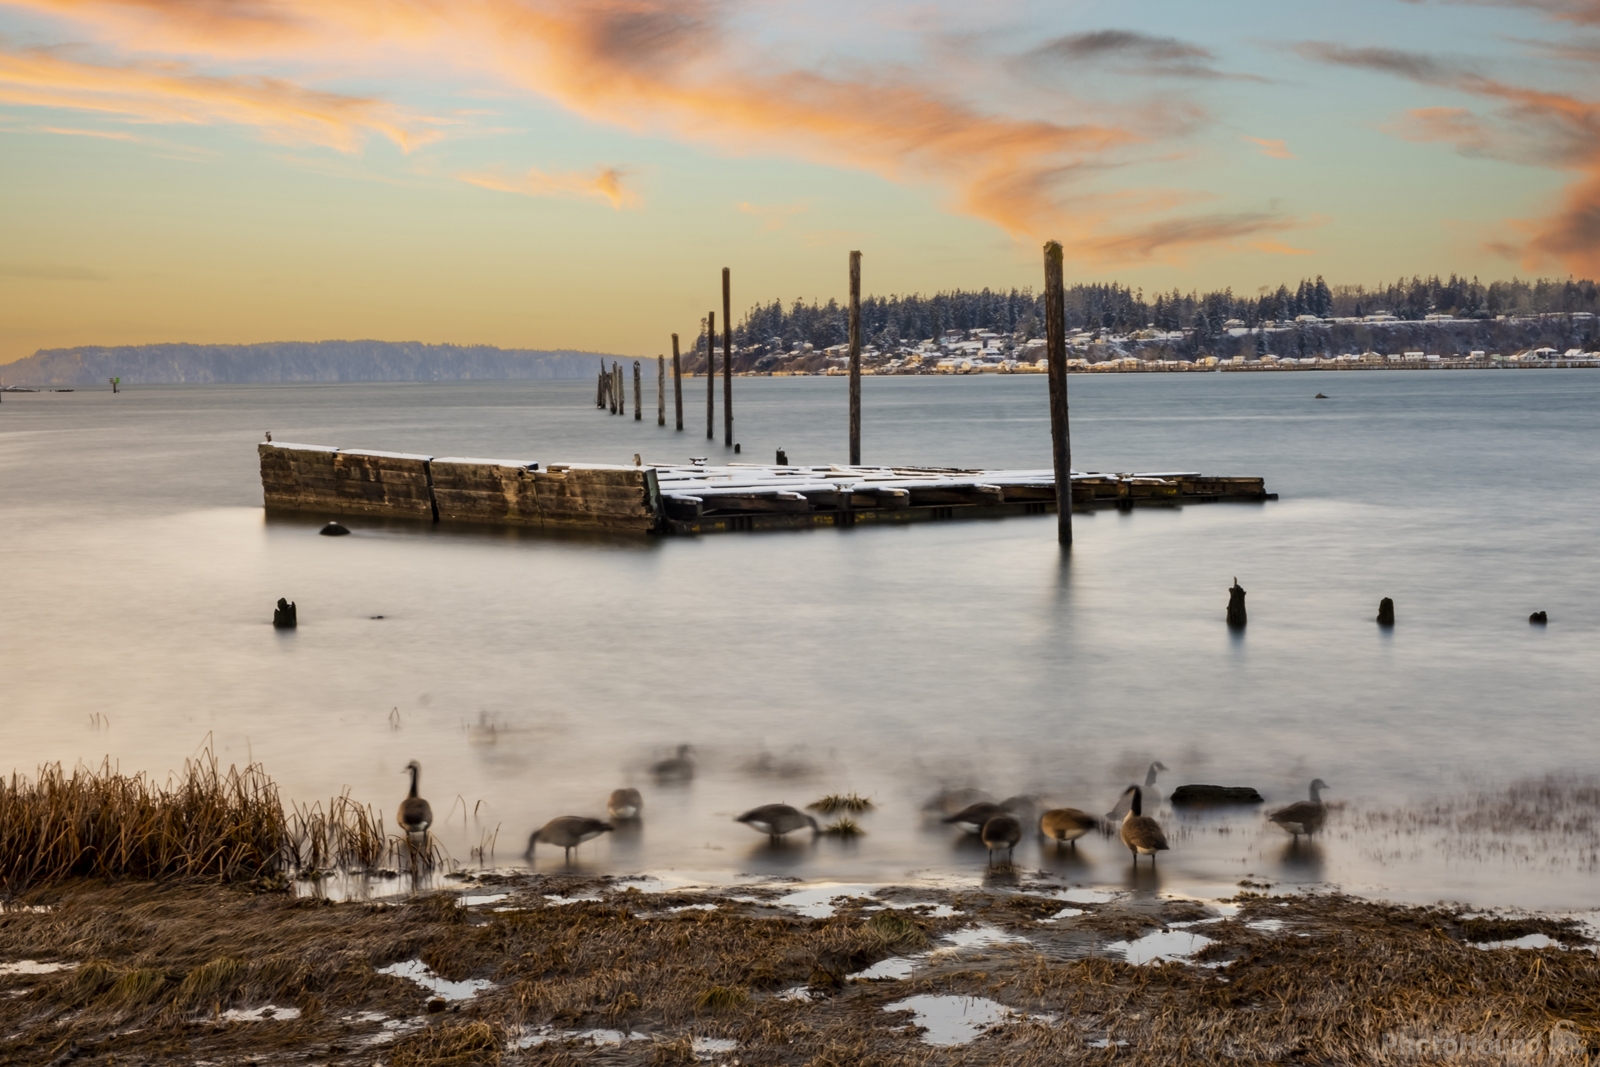 Image of Mouth of the Snohomish River by Arnie Lund